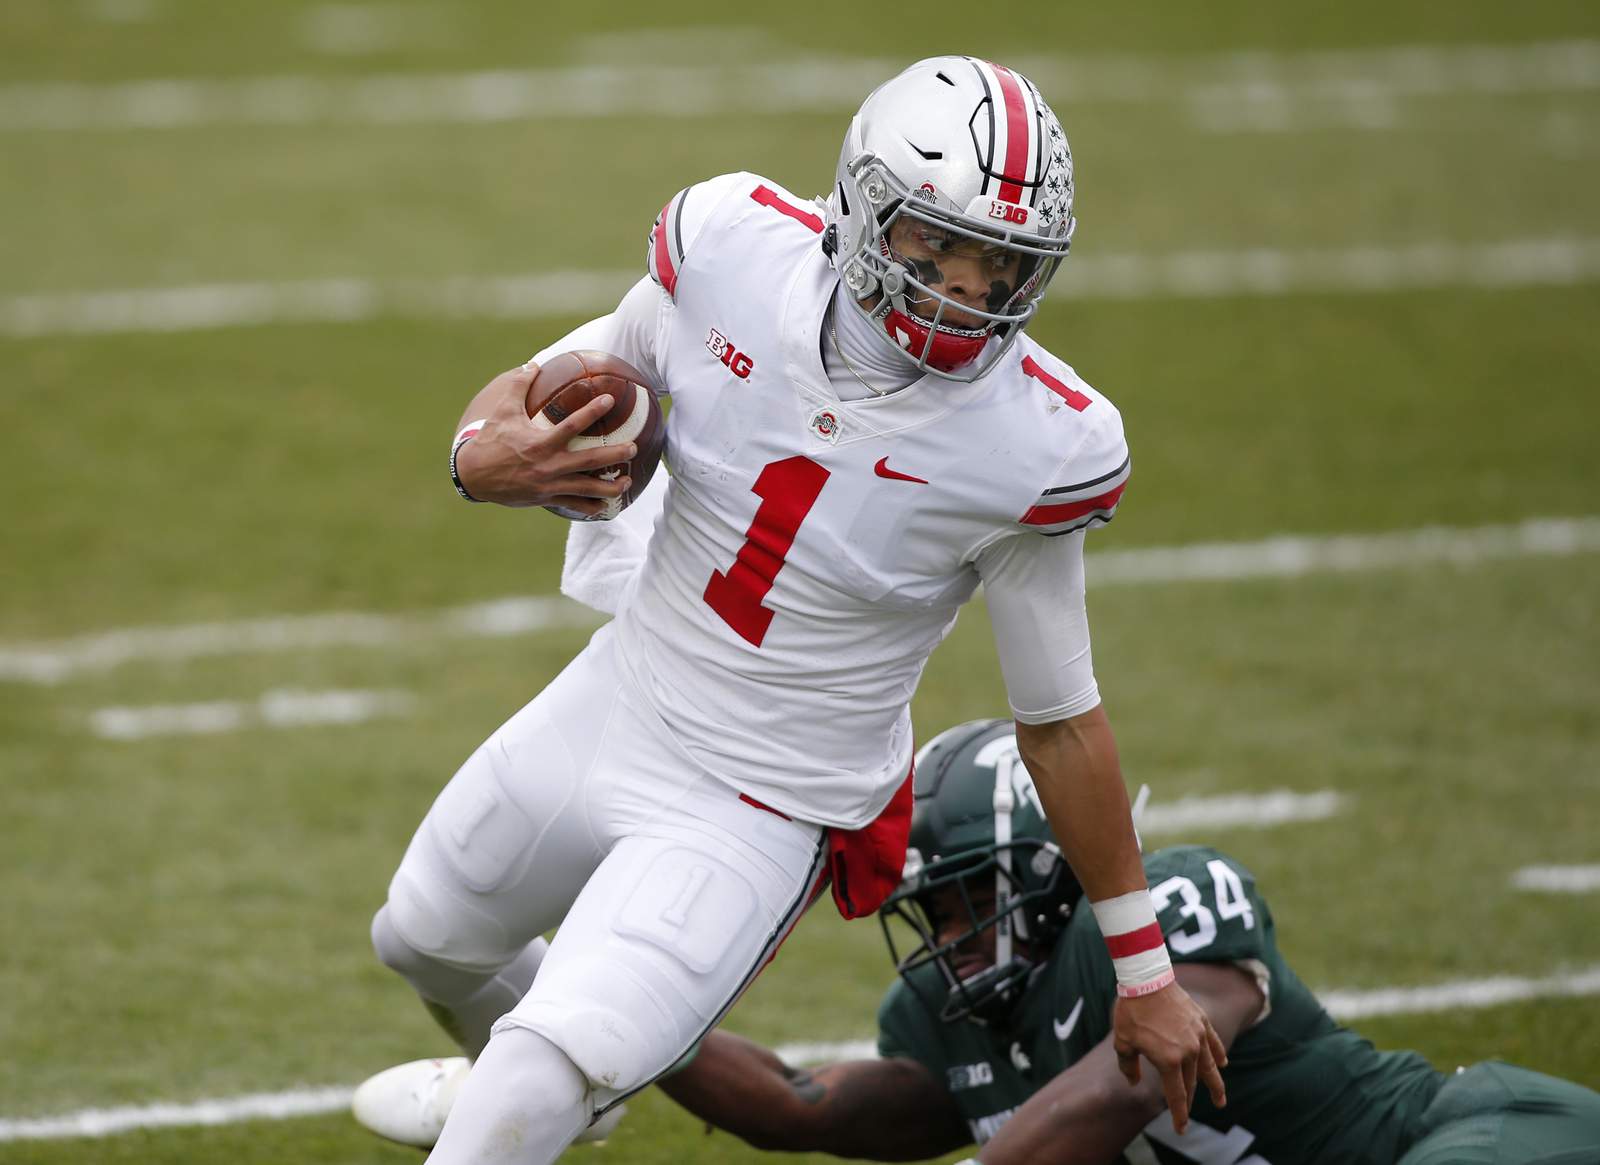 No. 3 Ohio State has no problem with Spartans in 52-12 win